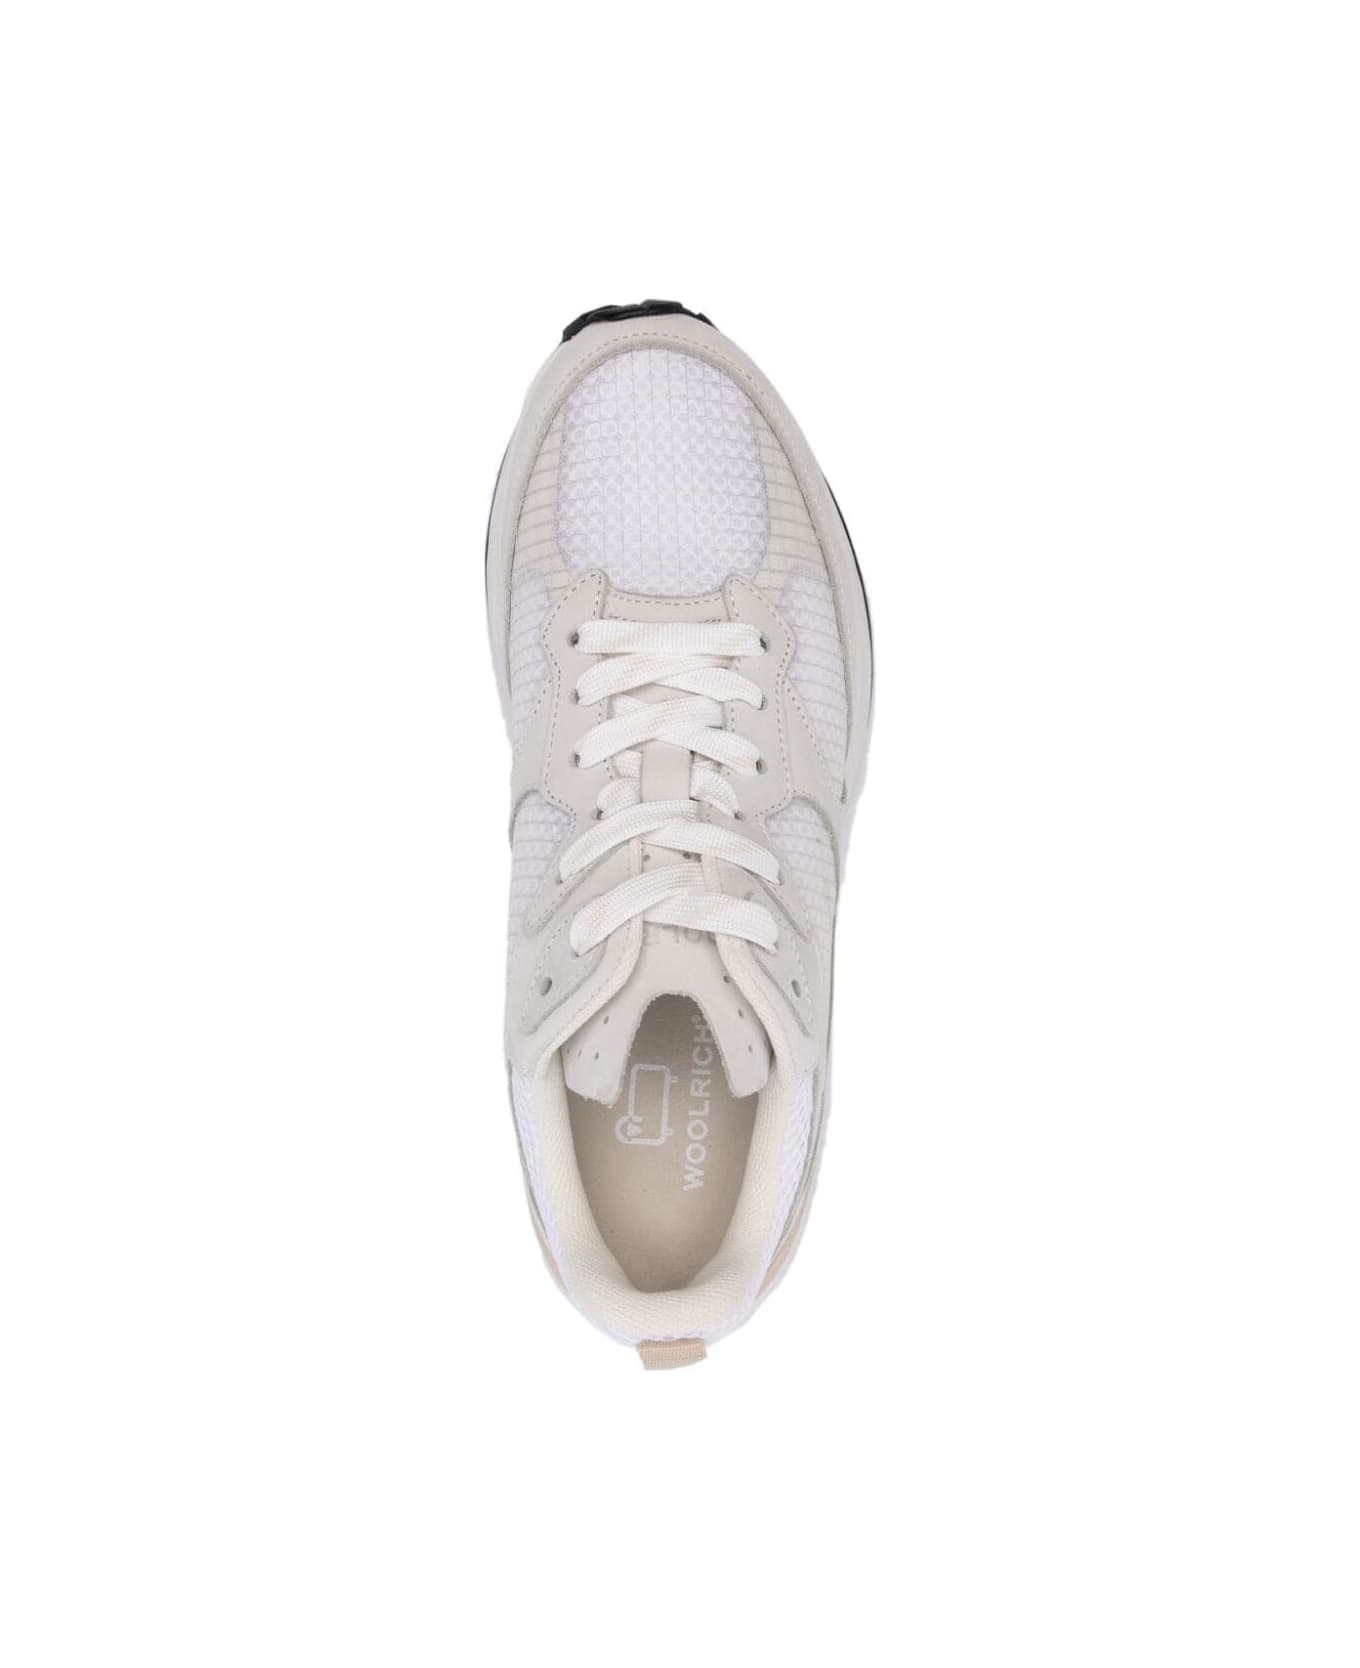 Woolrich Running Sneakers - White White